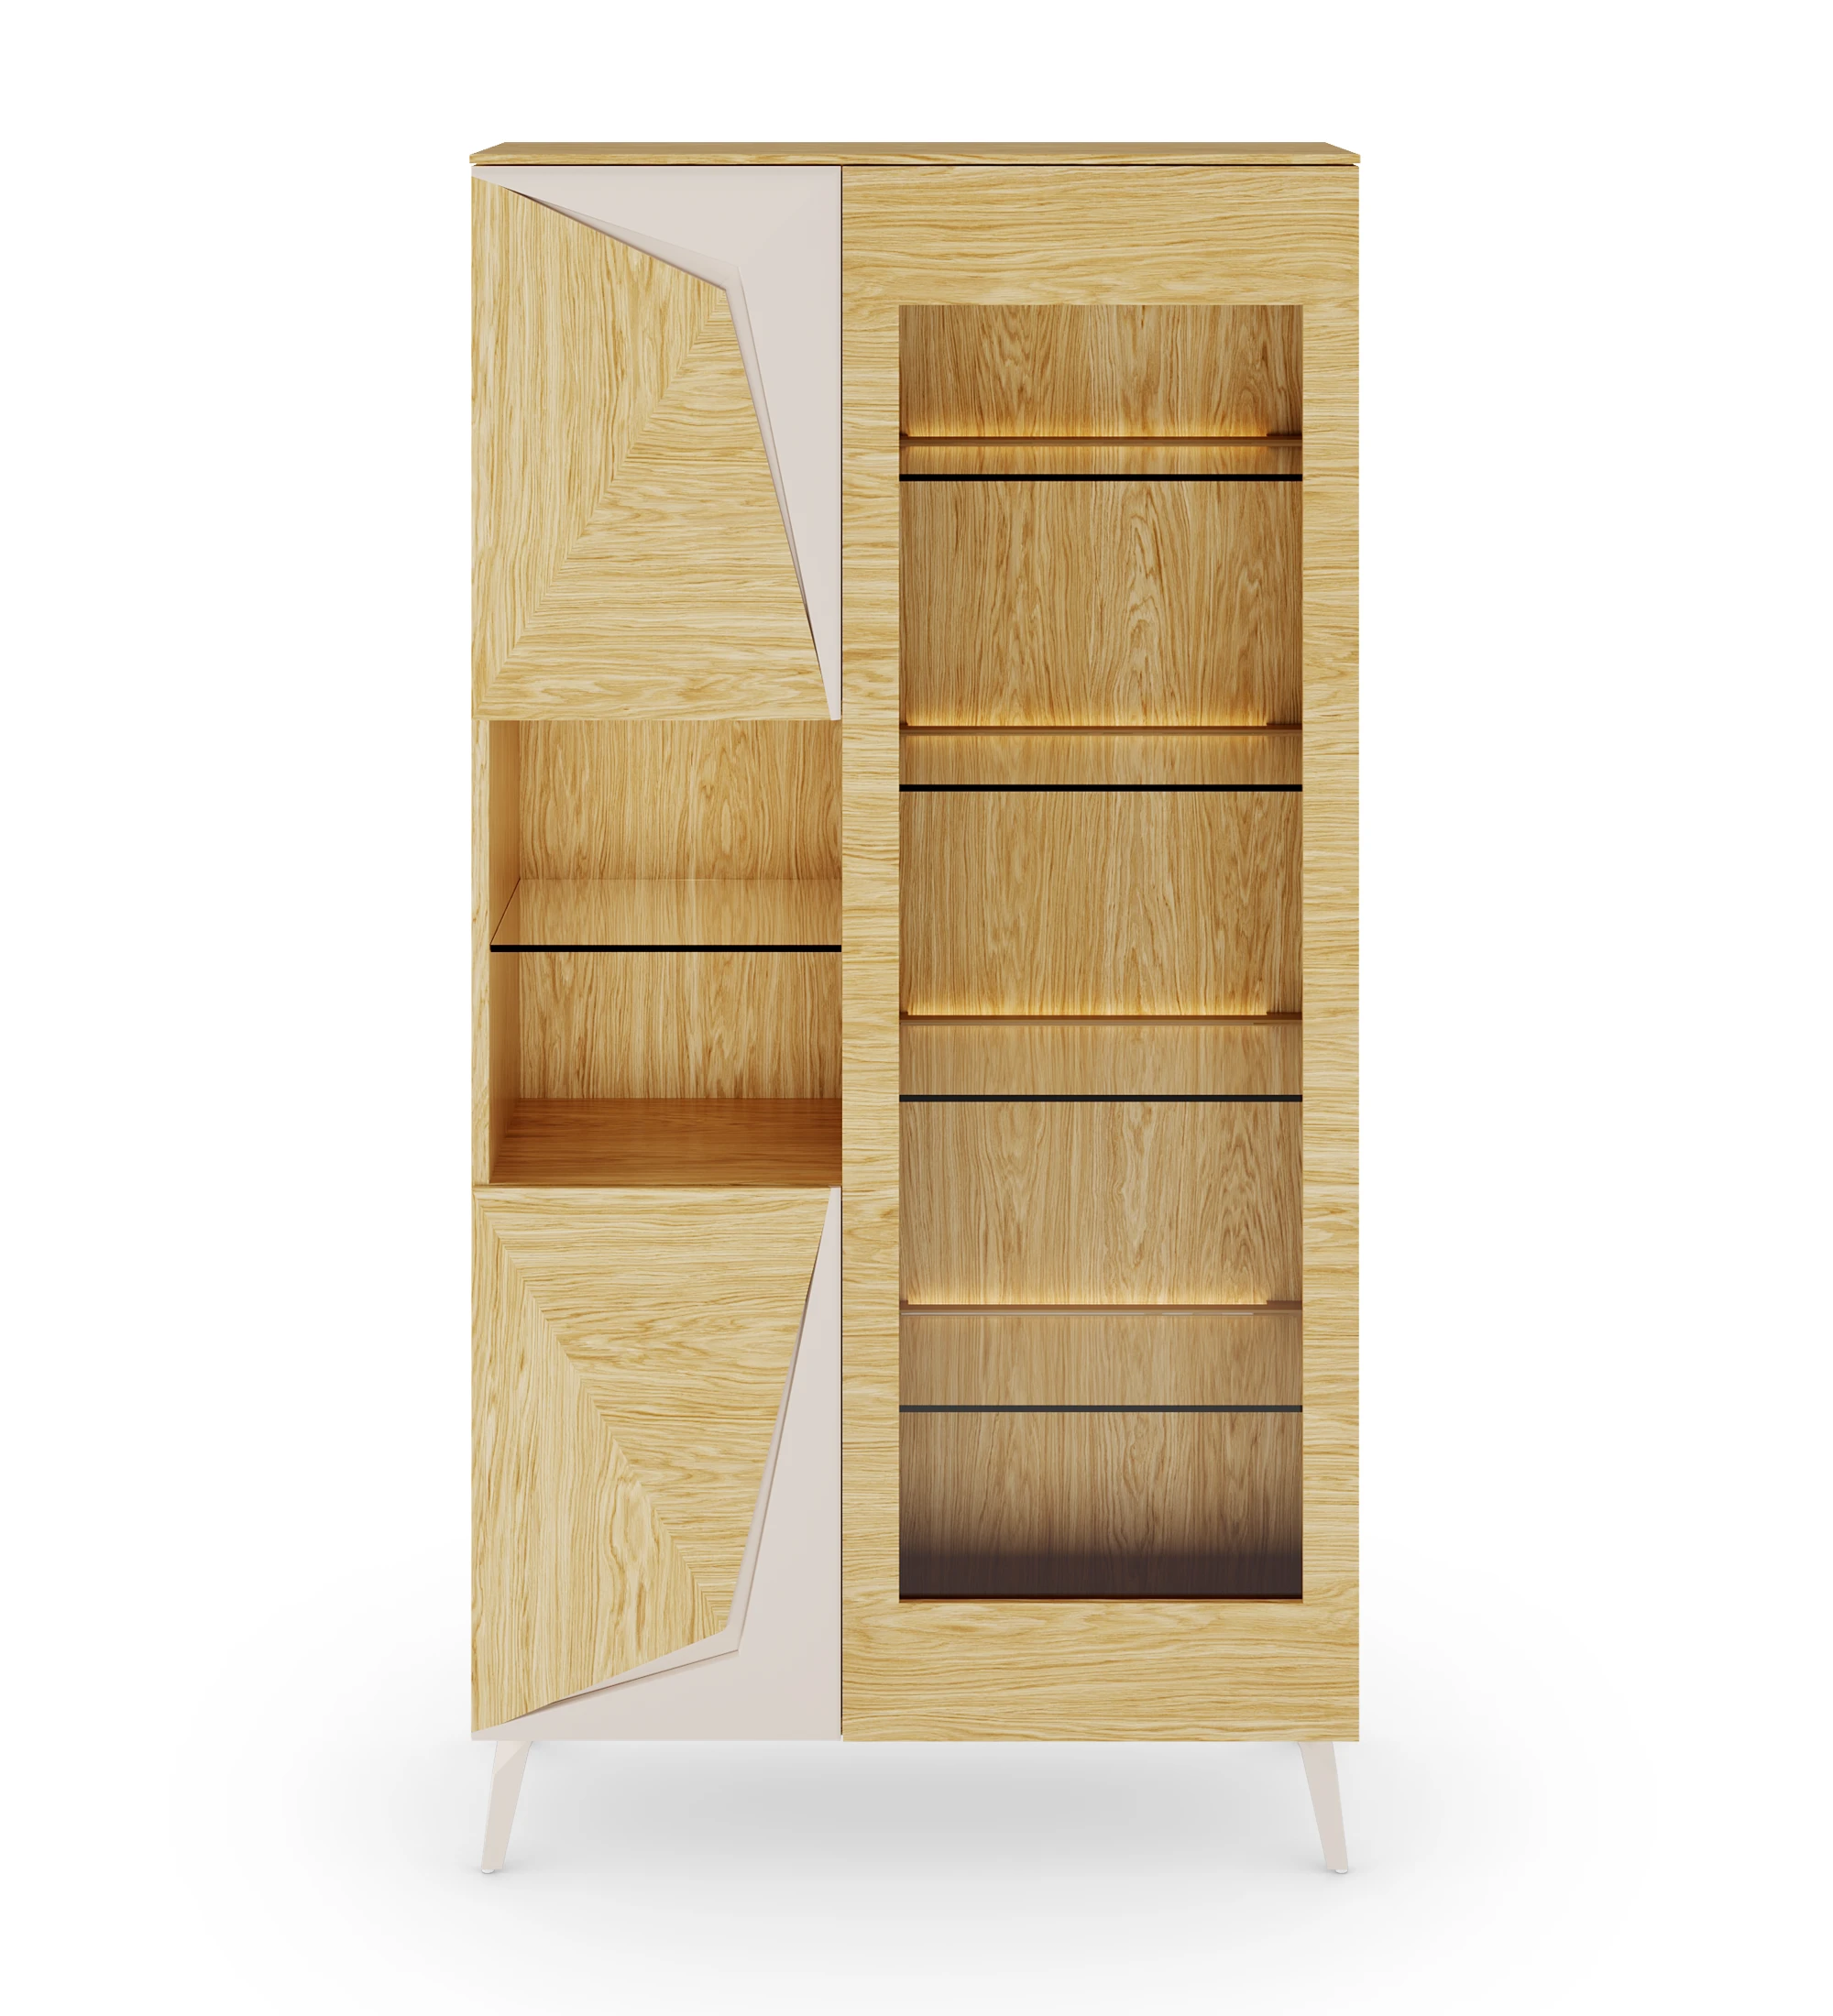 Showcase with 4 doors in natural oak with pearl details, with natural oak structure and metal base lacquered in pearl.